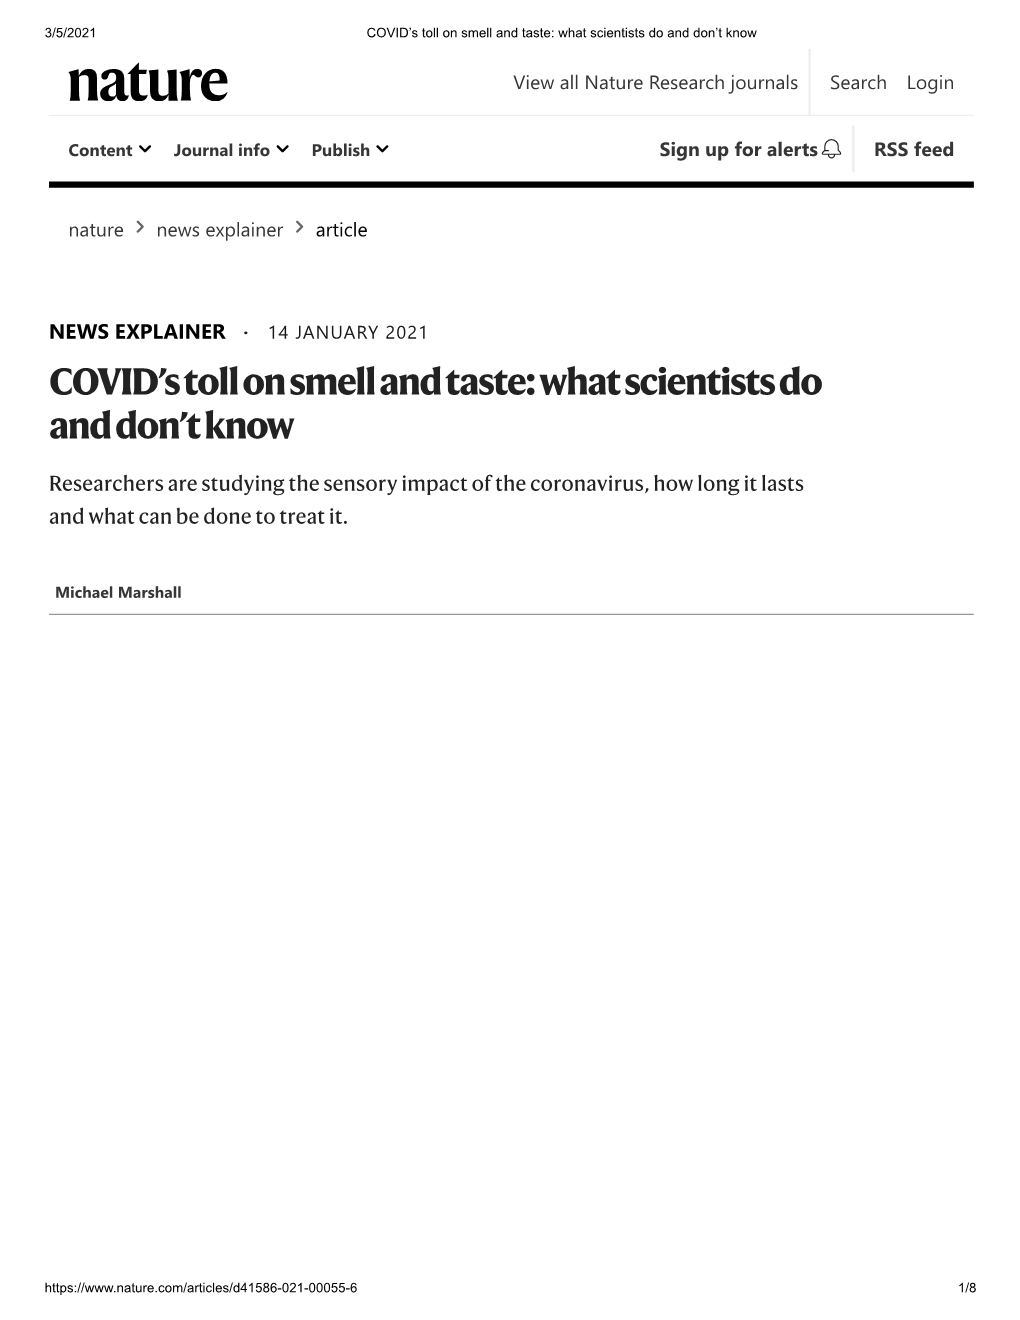 COVID's Toll on Smell and Taste: What Scientists Do and Don't Know